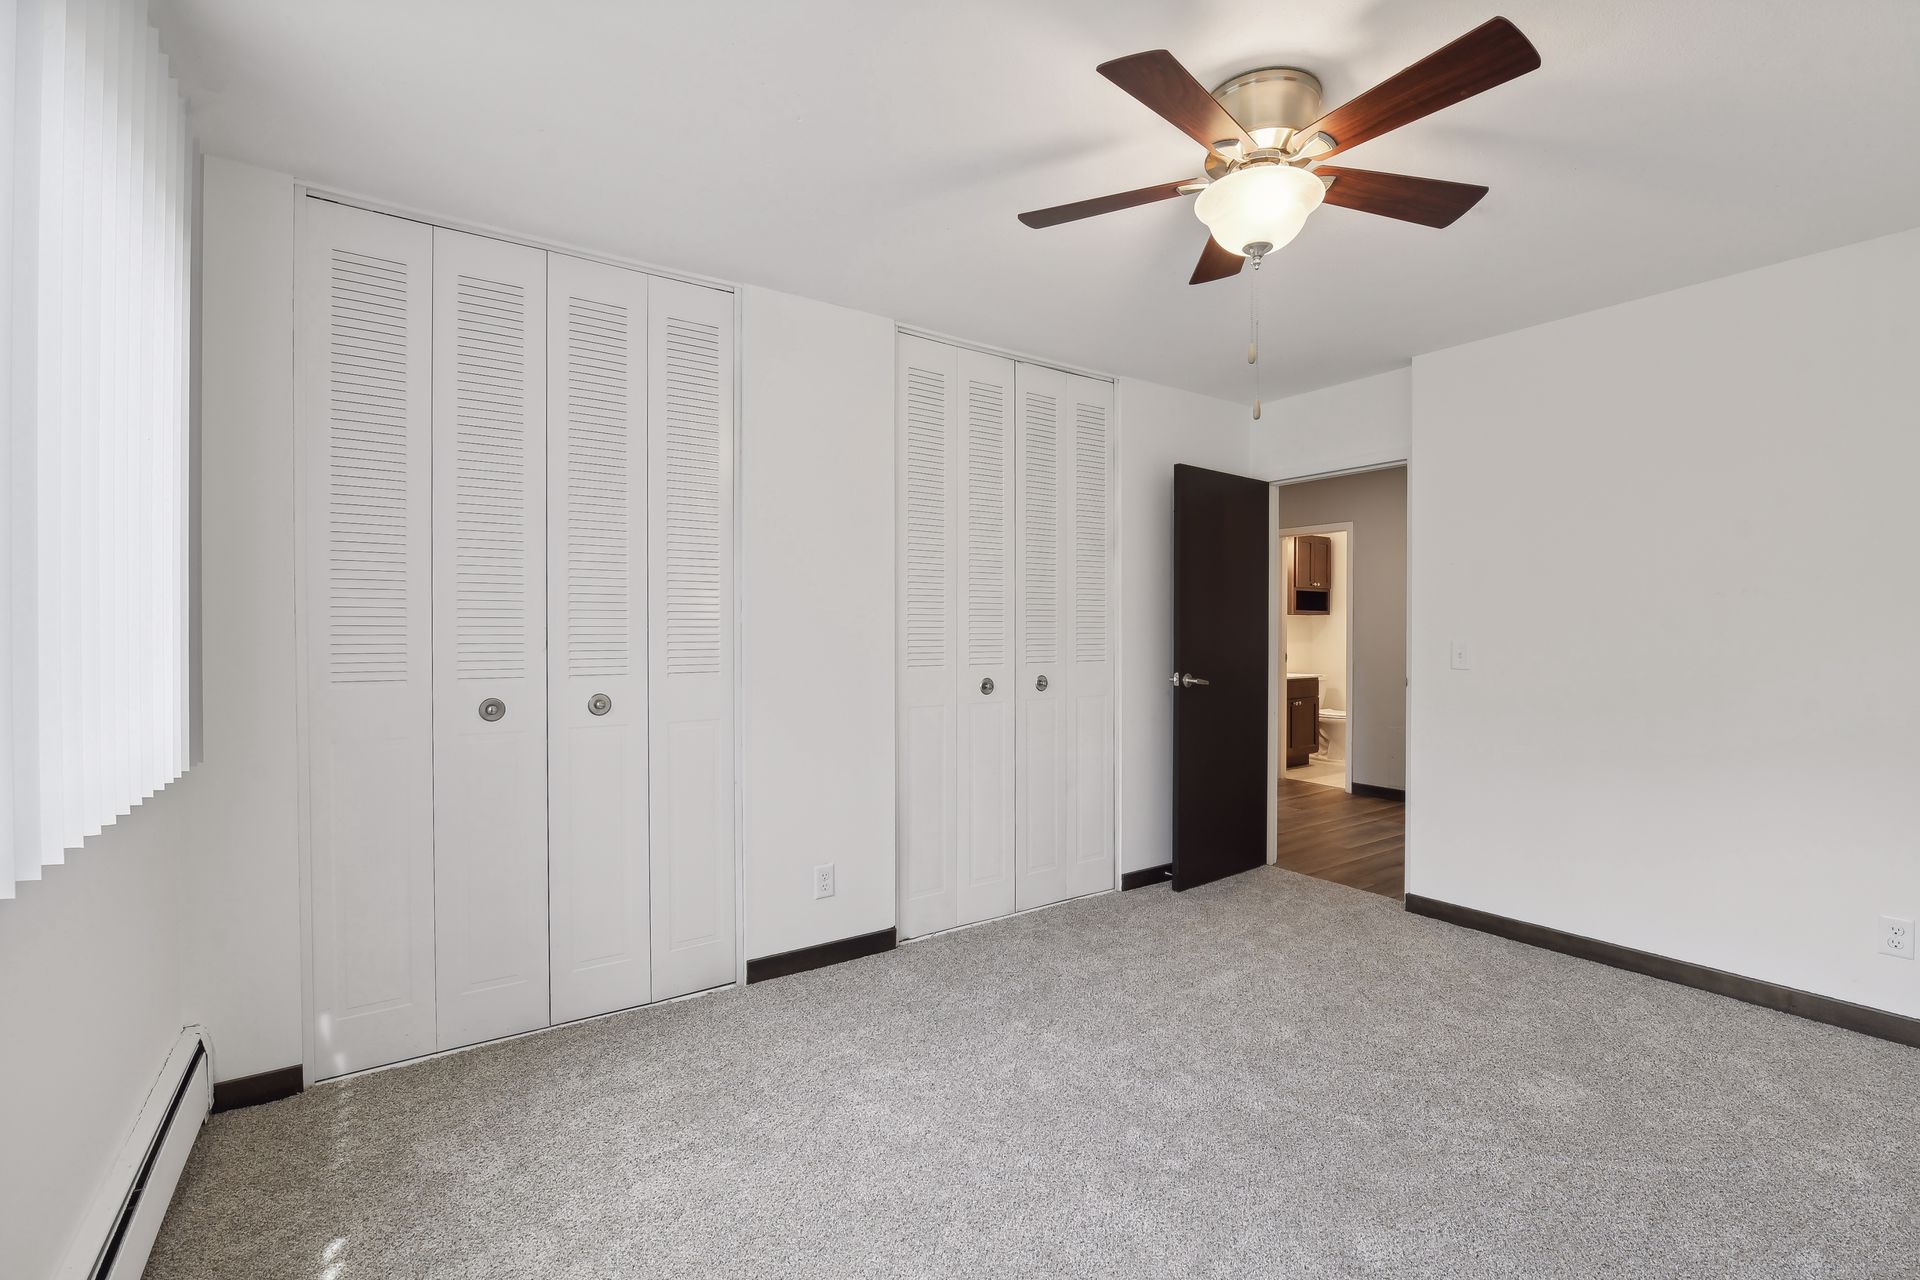 Bedroom with two large closets and a ceiling fan